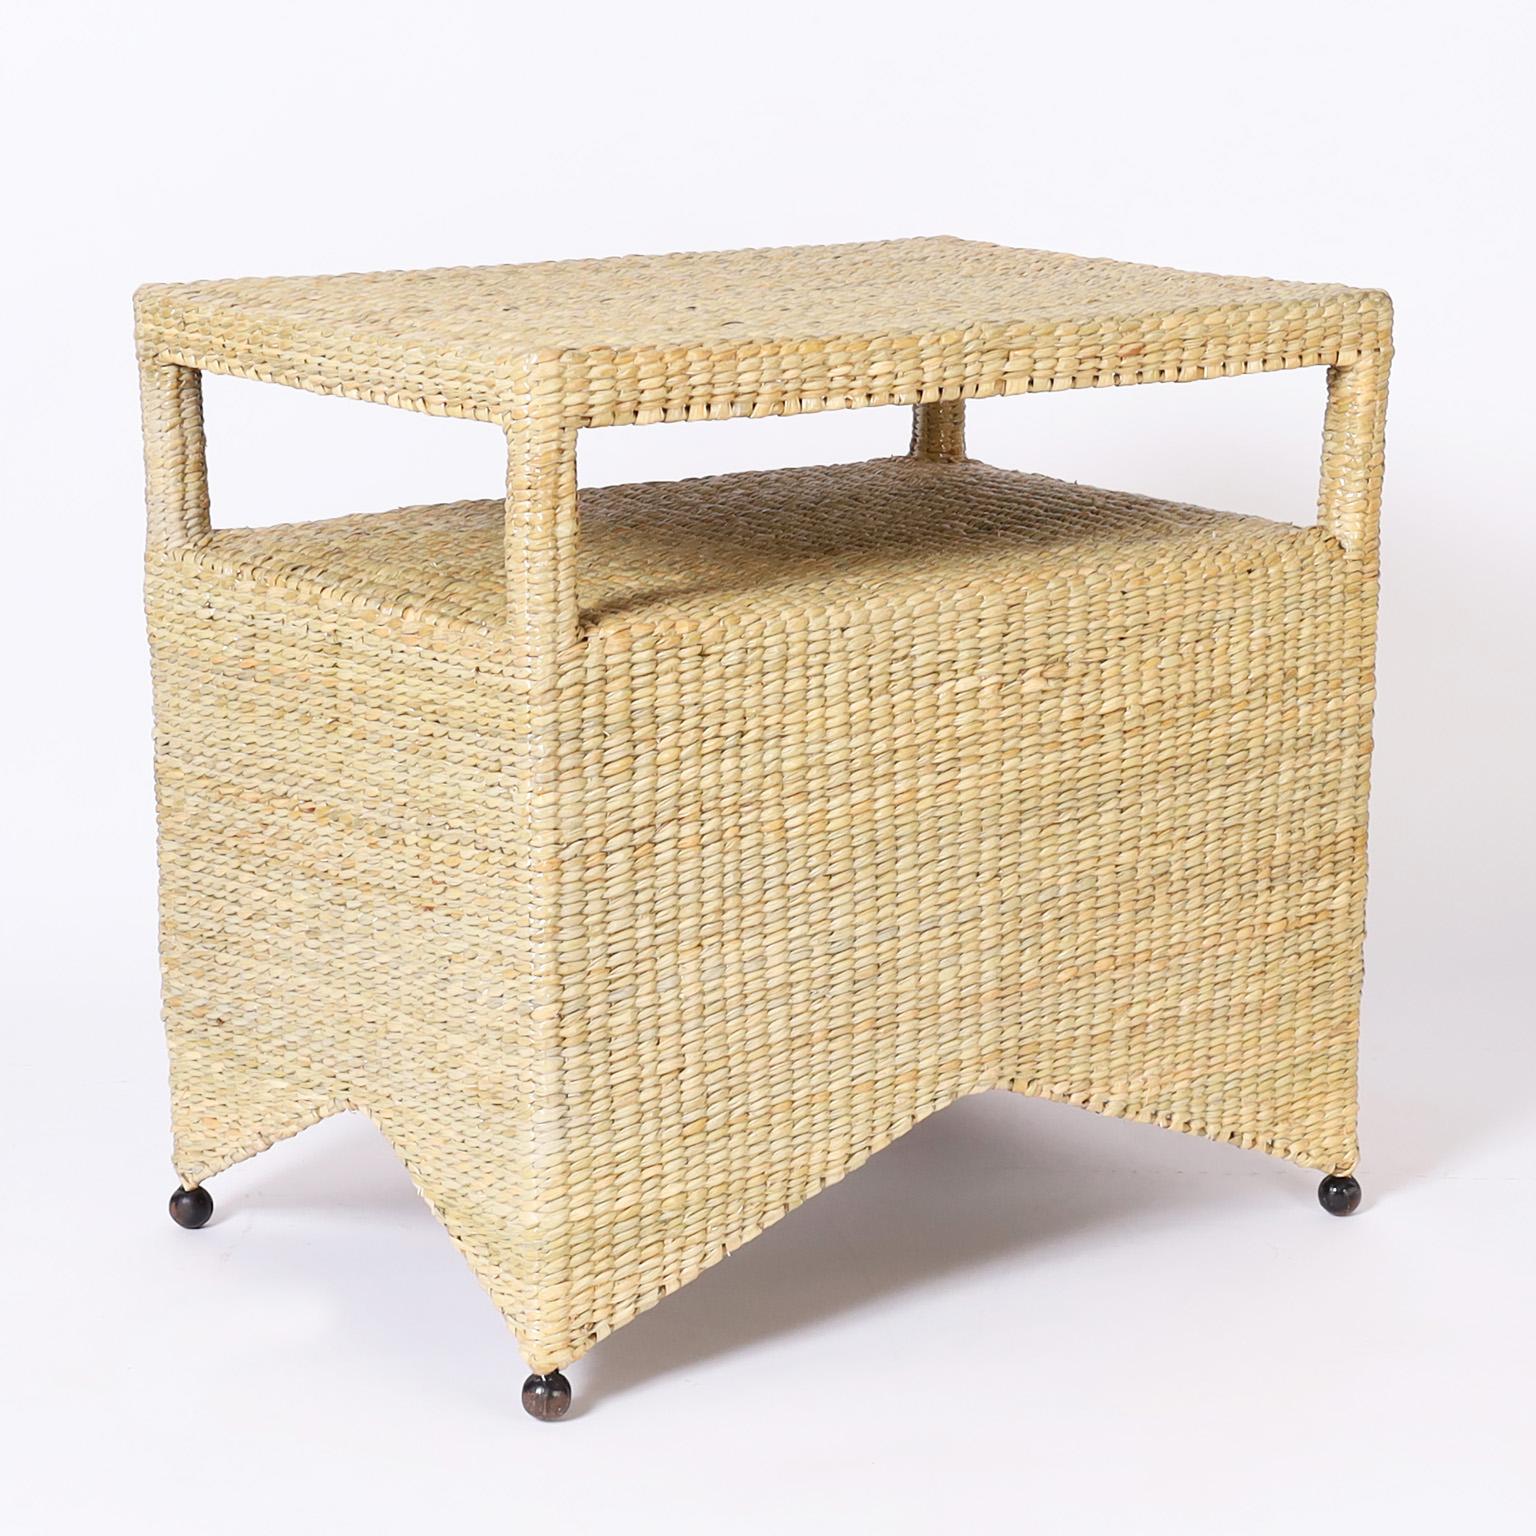 Hand-Woven Pair of Two Tiered Wicker Stands from the FS Flores Collection